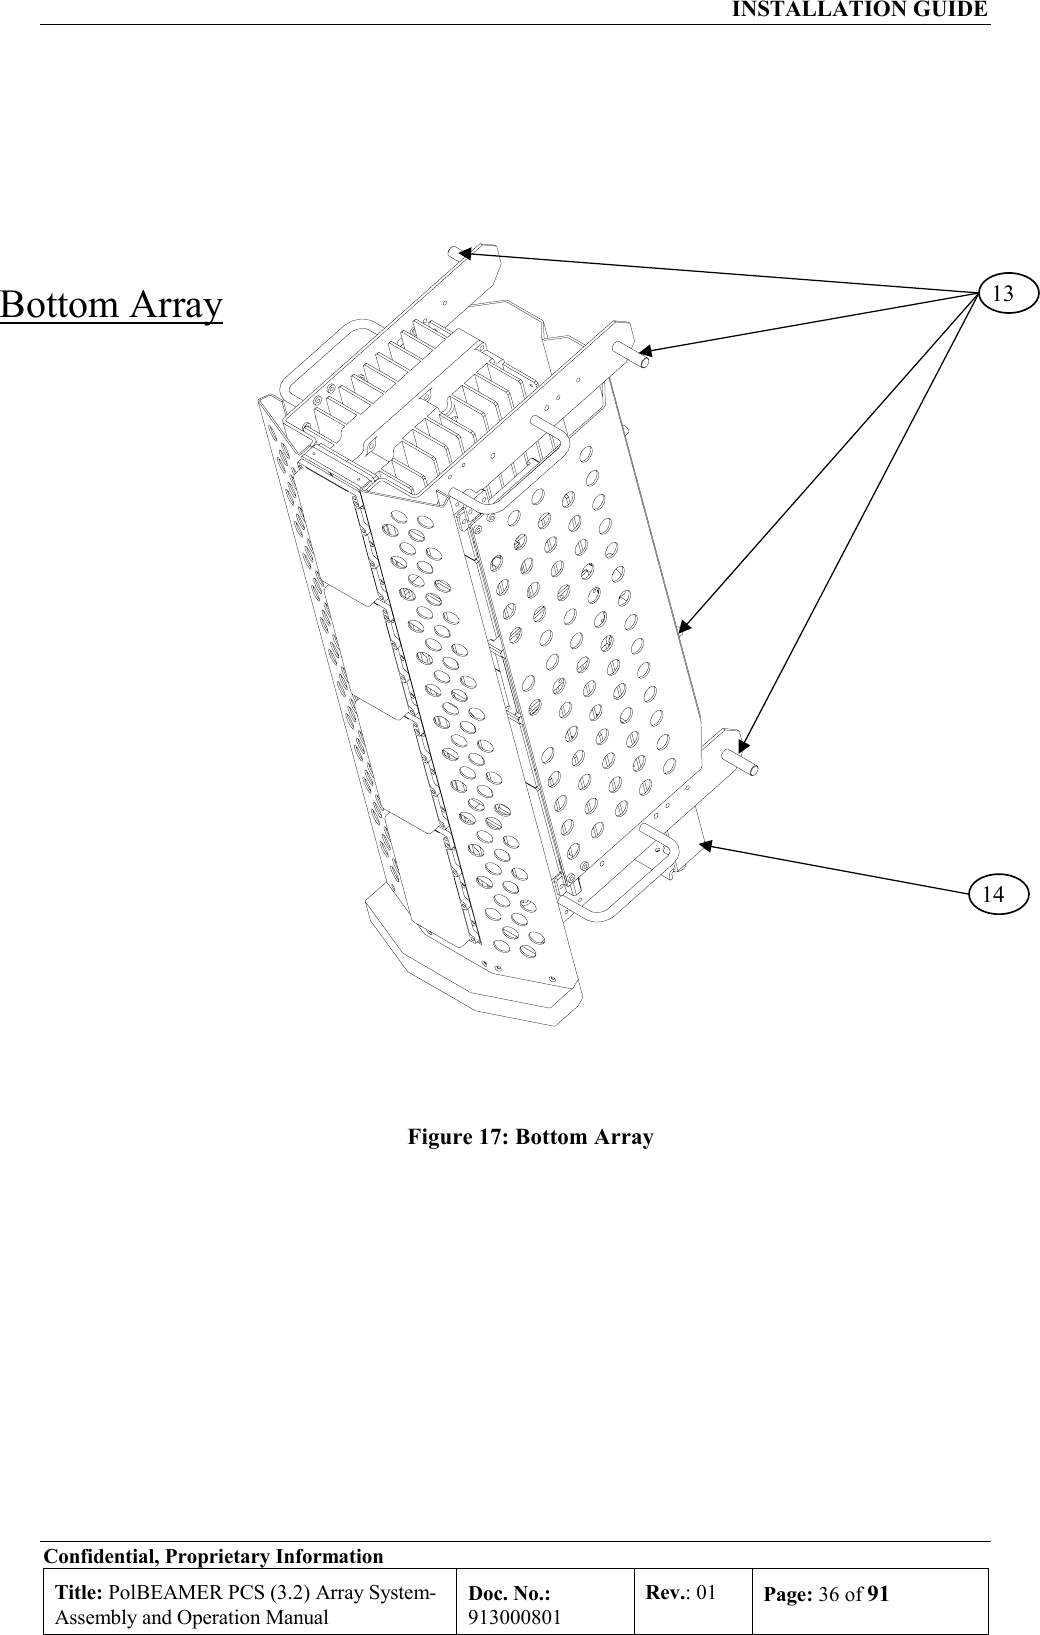  INSTALLATION GUIDE Confidential, Proprietary Information Title: PolBEAMER PCS (3.2) Array System- Assembly and Operation Manual Doc. No.: 913000801 Rev.: 01  Page: 36 of 91       Figure 17: Bottom Array      Bottom Array 1314